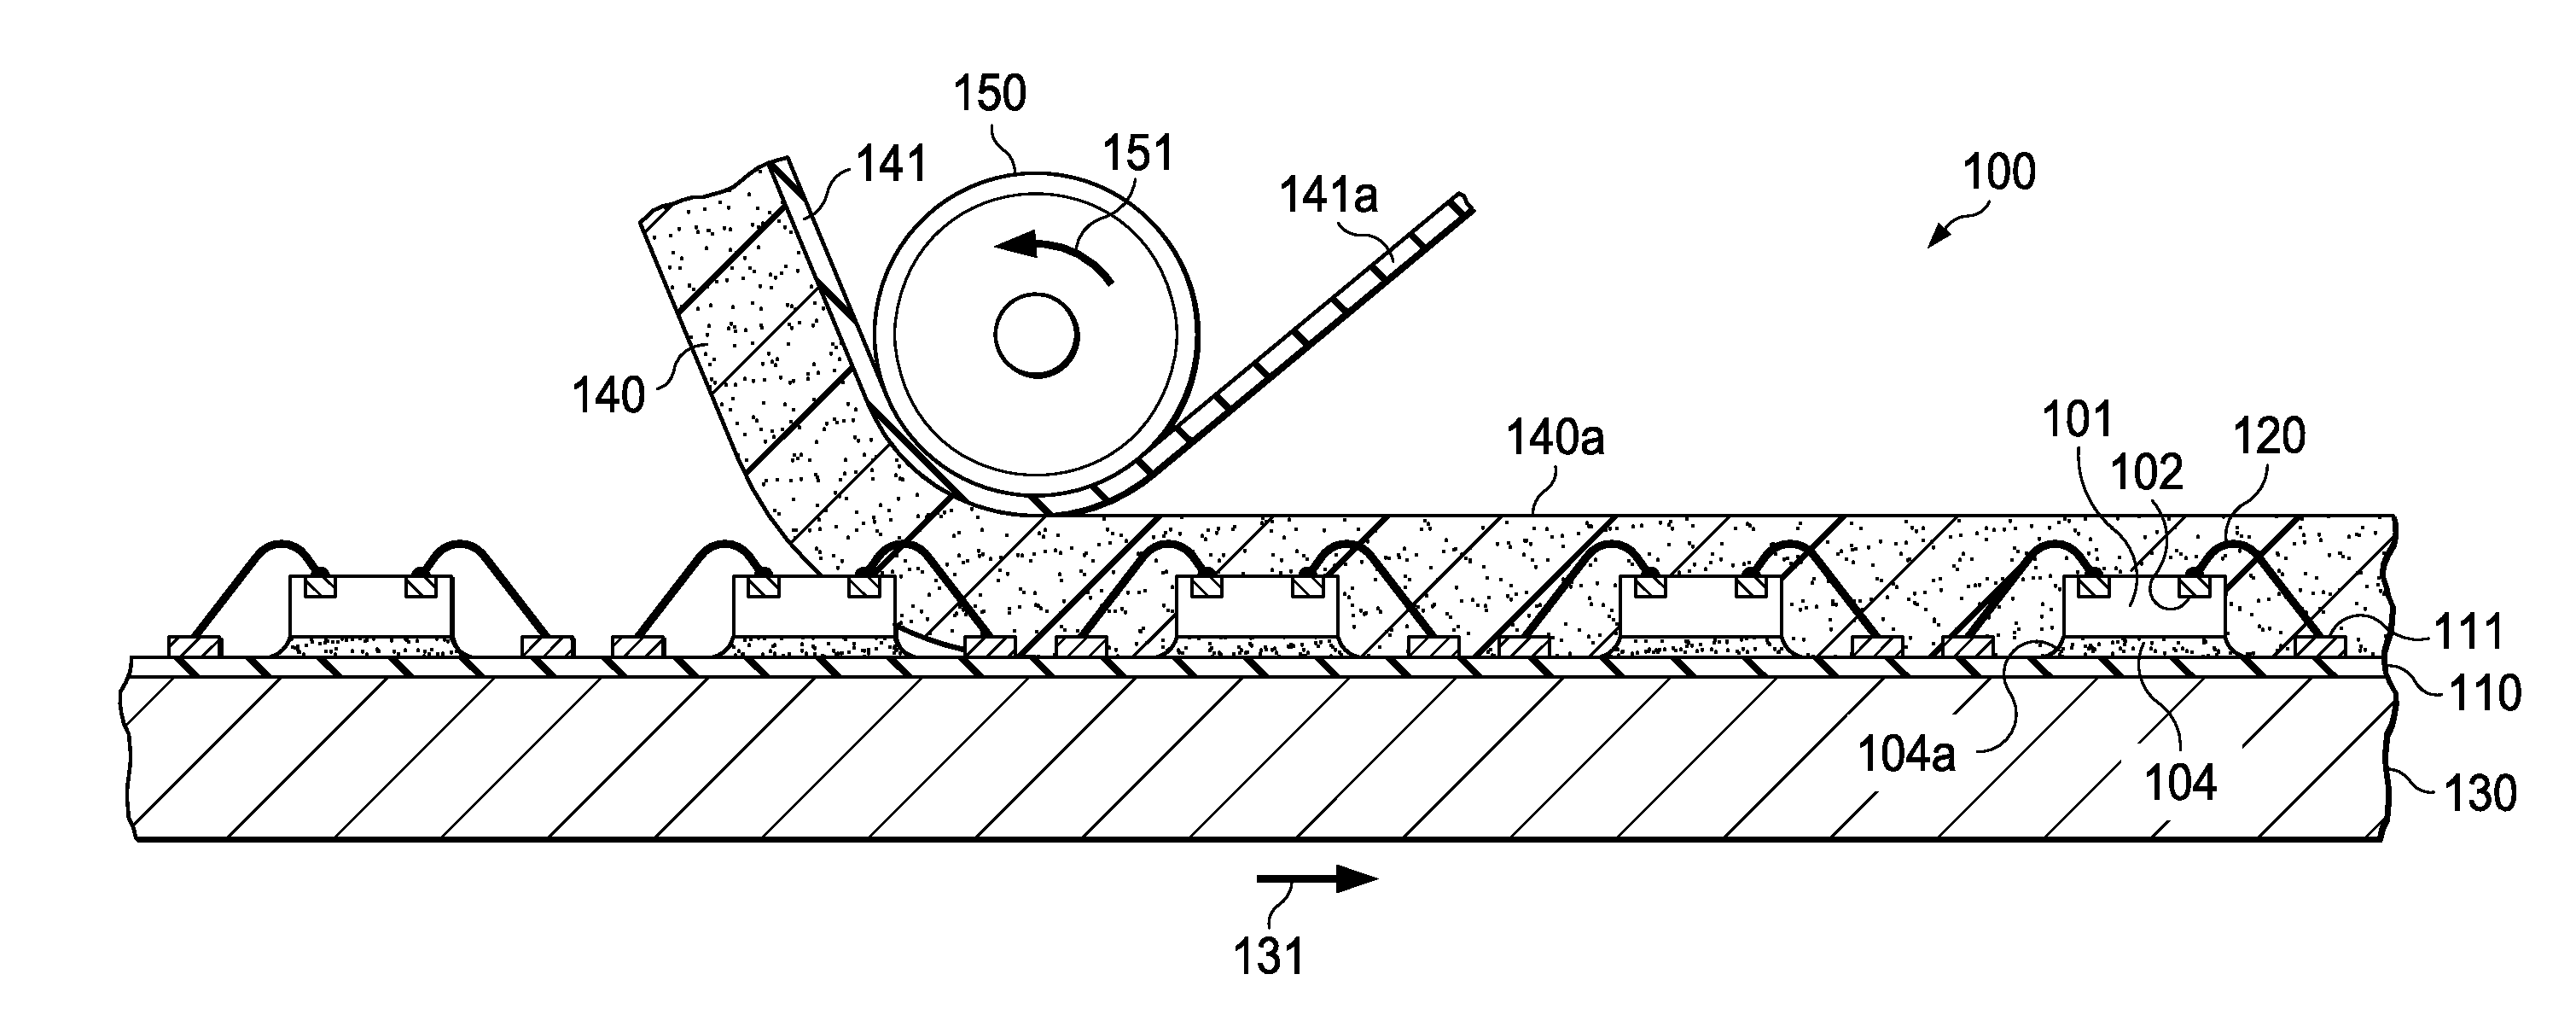 Roll-on encapsulation method for semiconductor packages